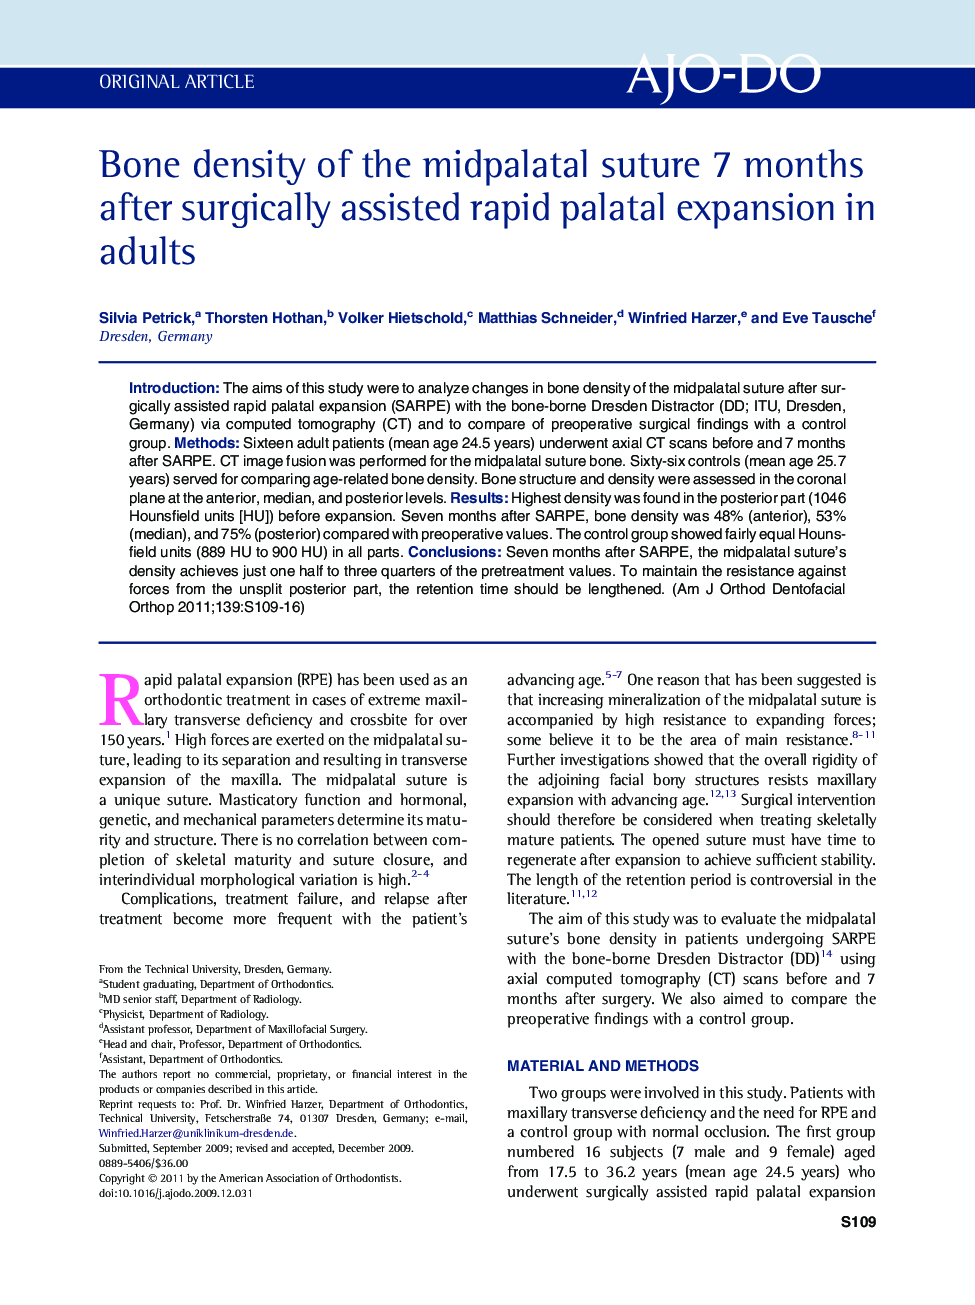 Bone density of the midpalatal suture 7 months after surgically assisted rapid palatal expansion in adults 